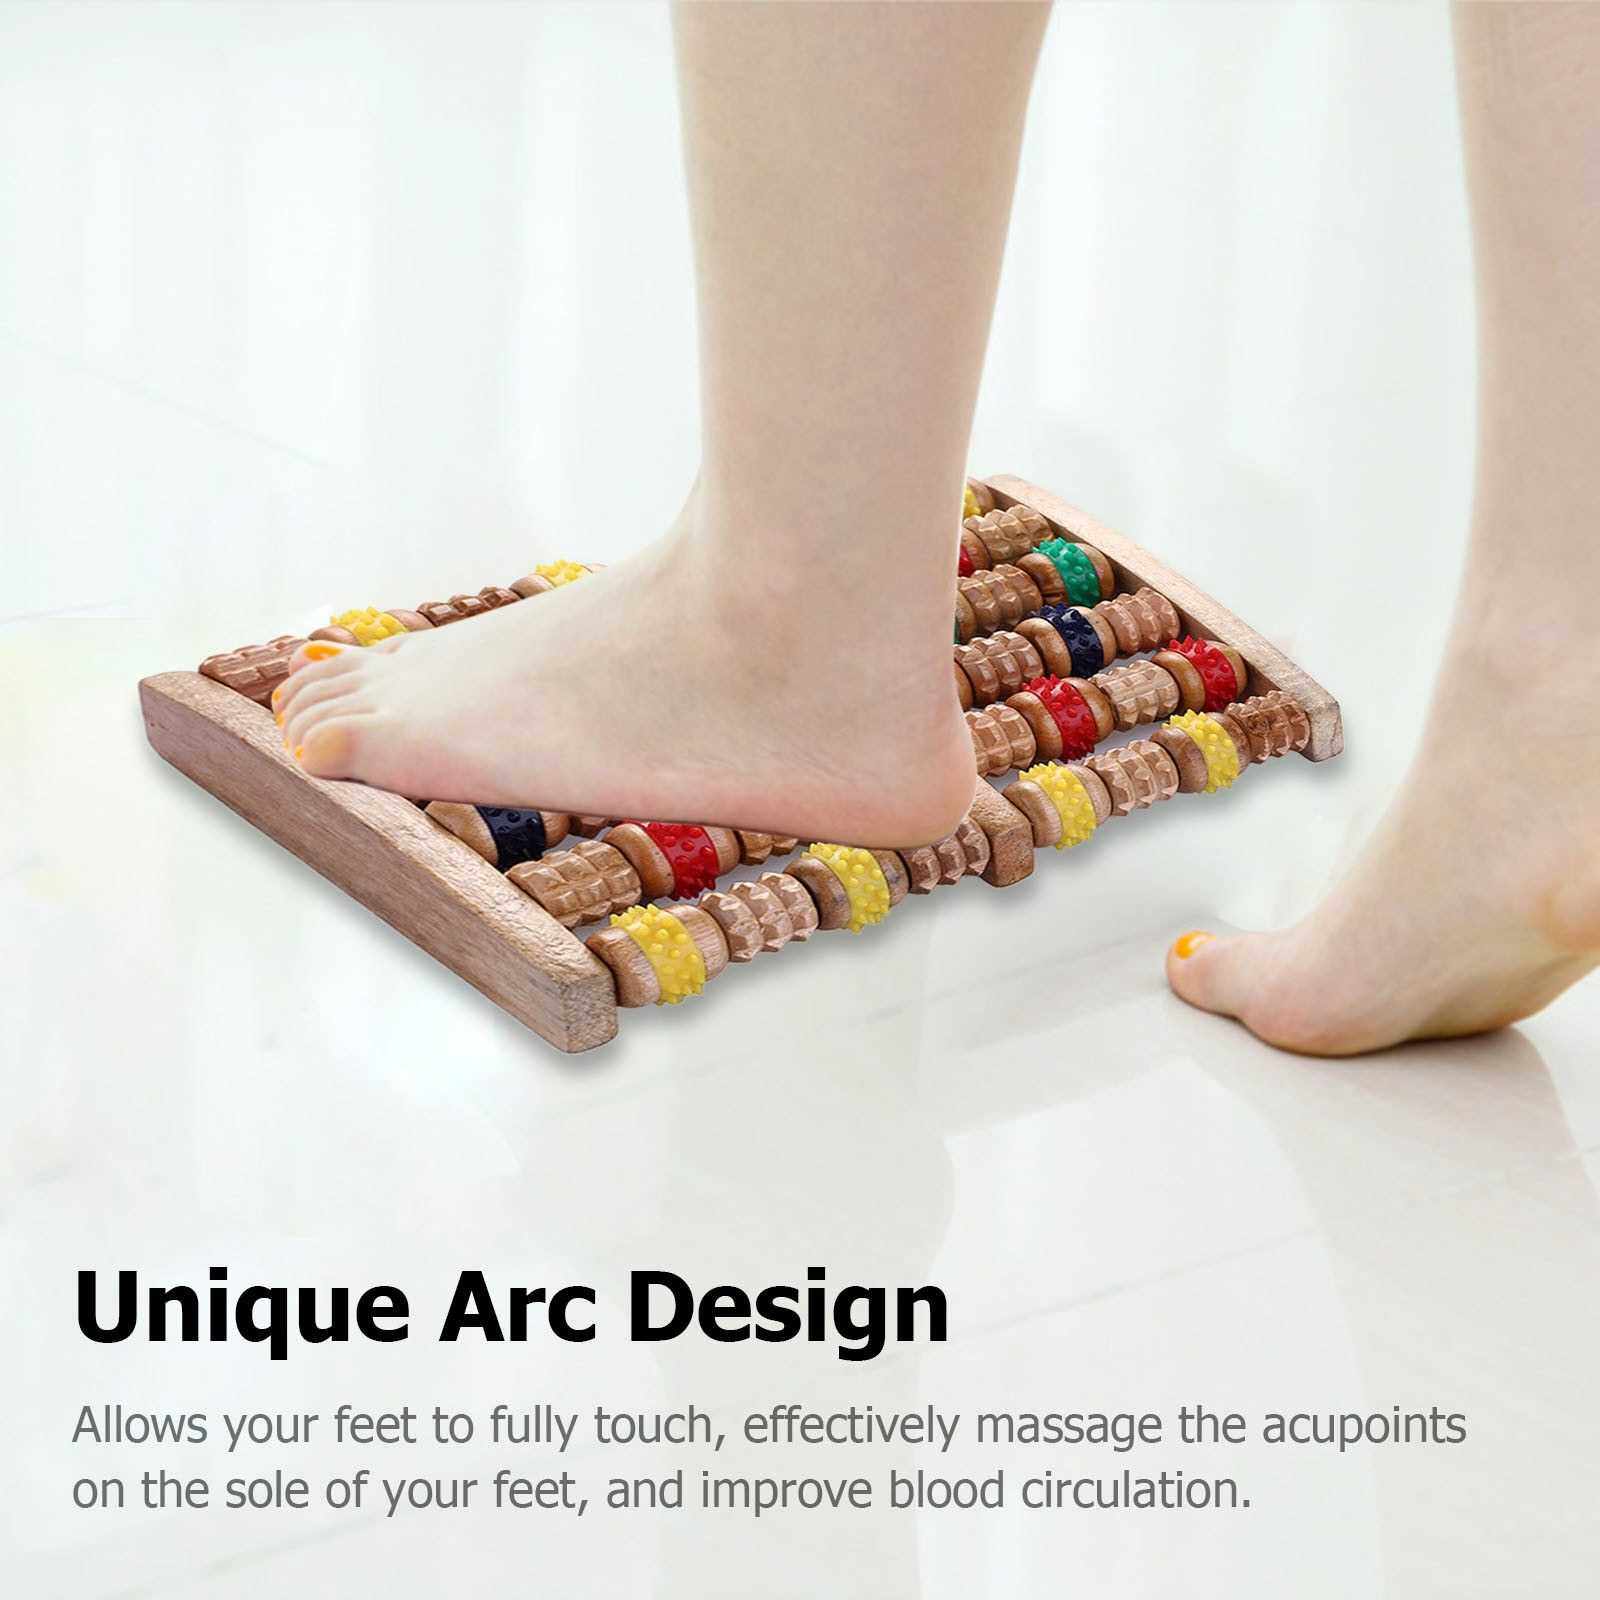 6 Rows Large Wooden Dual Foot Massager Roller Blood Circulation Care Tool for Plantar Fasciitis Heel Foot Arch Muscle Pain Relief Stress Relief (Standard)